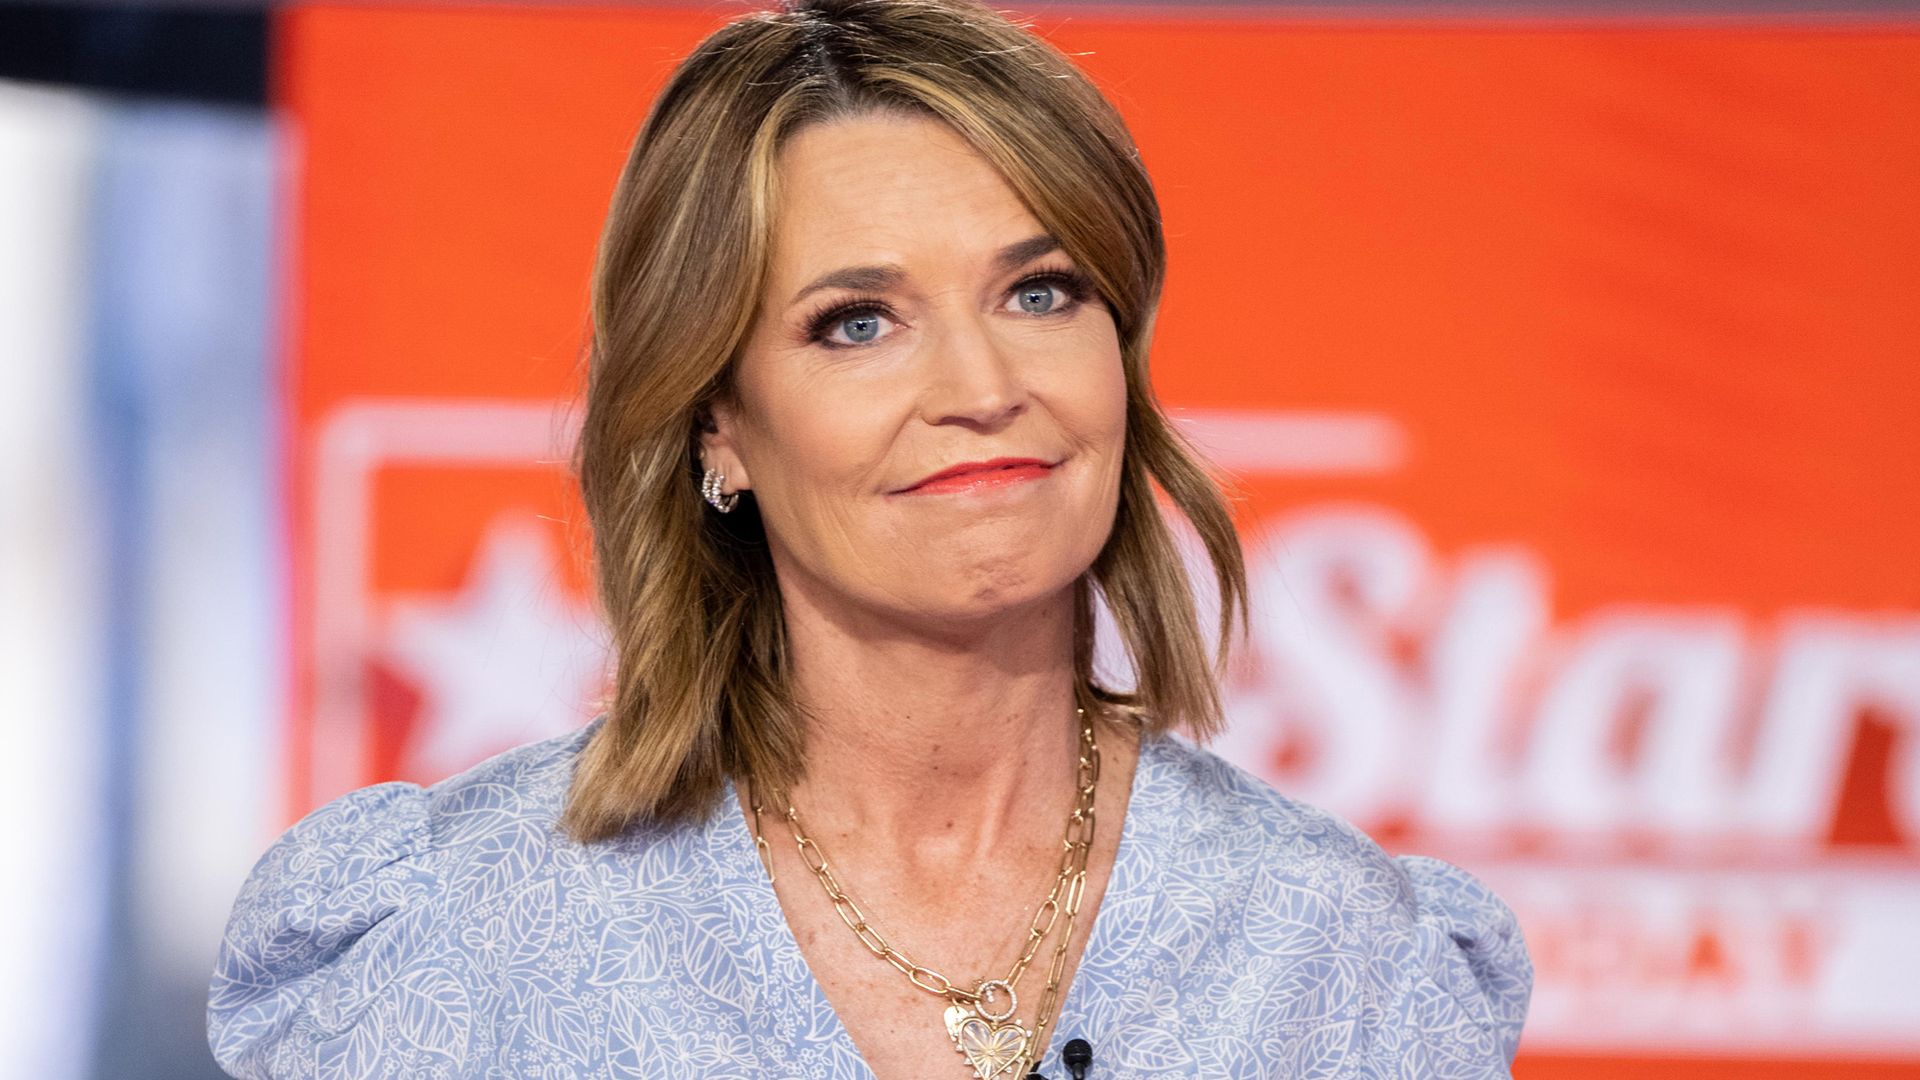 Today's Savannah Guthrie in the NBC studio